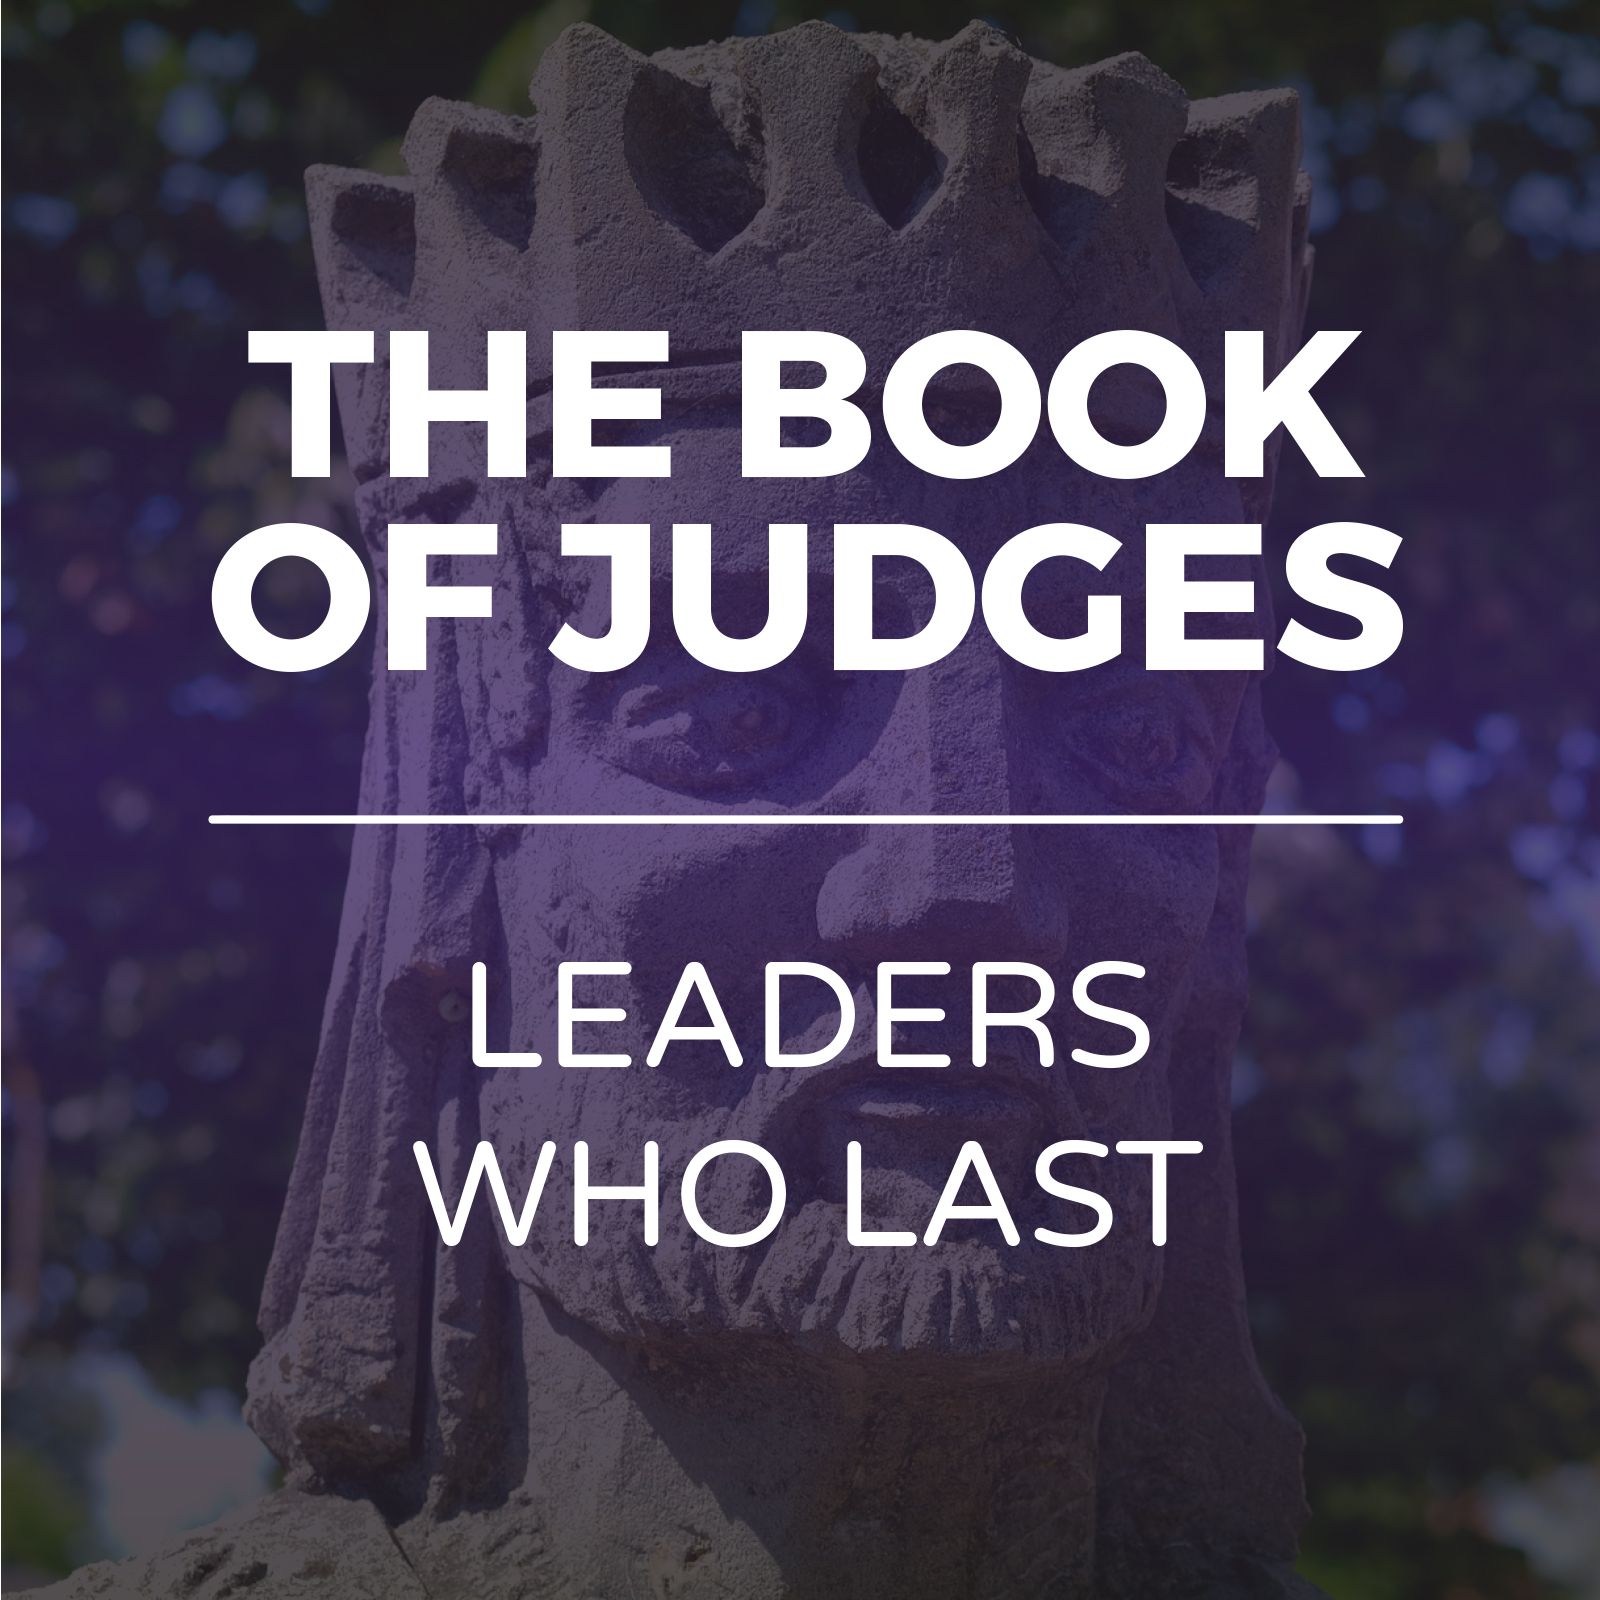 The Book of Judges - Leaders who last